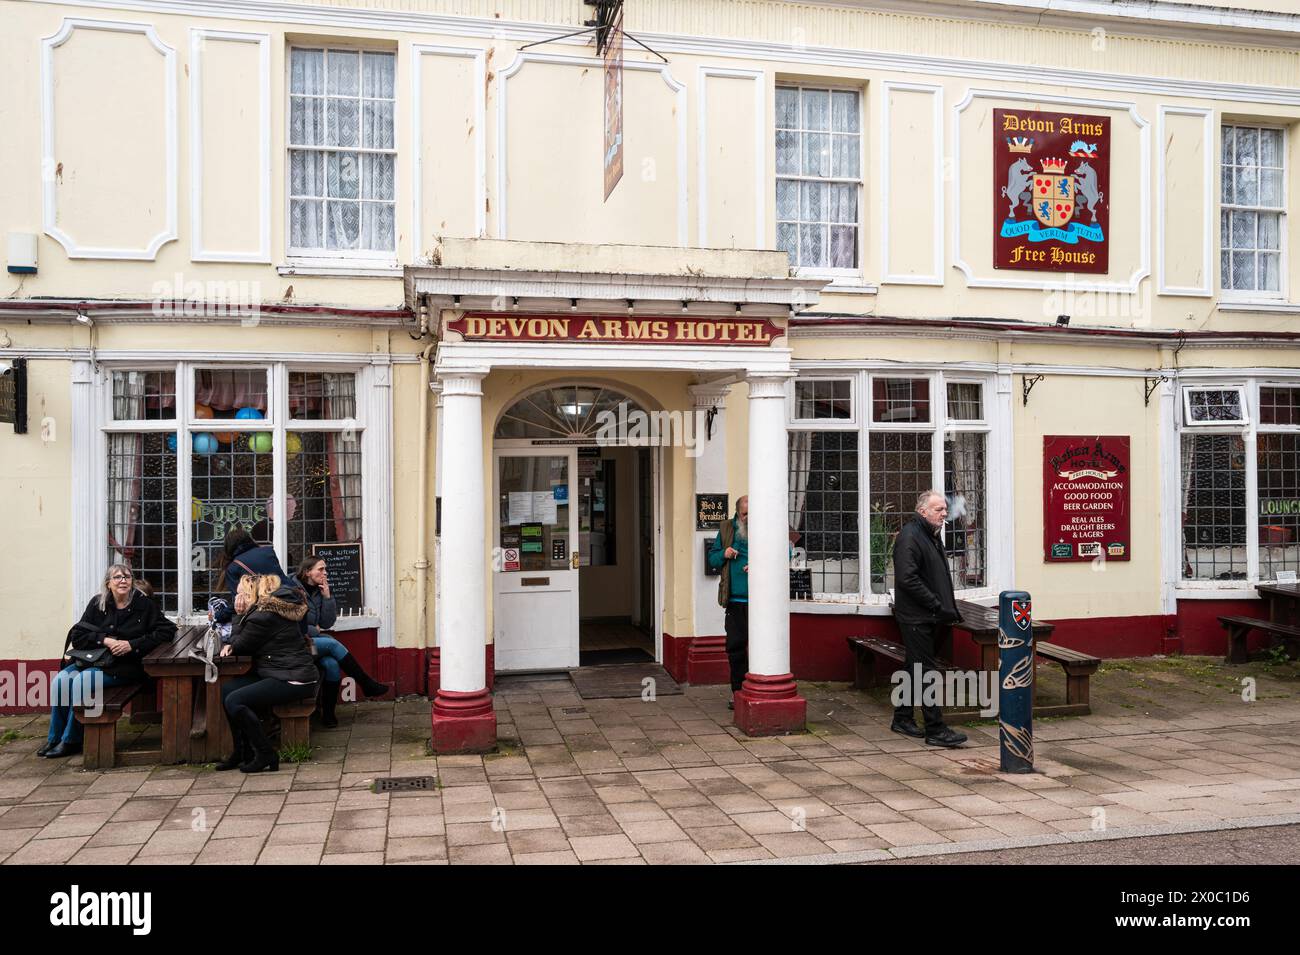 People sitting outside the Devon Arms public house in Teignmouth, Devon, UK. Colour photography. Stock Photo